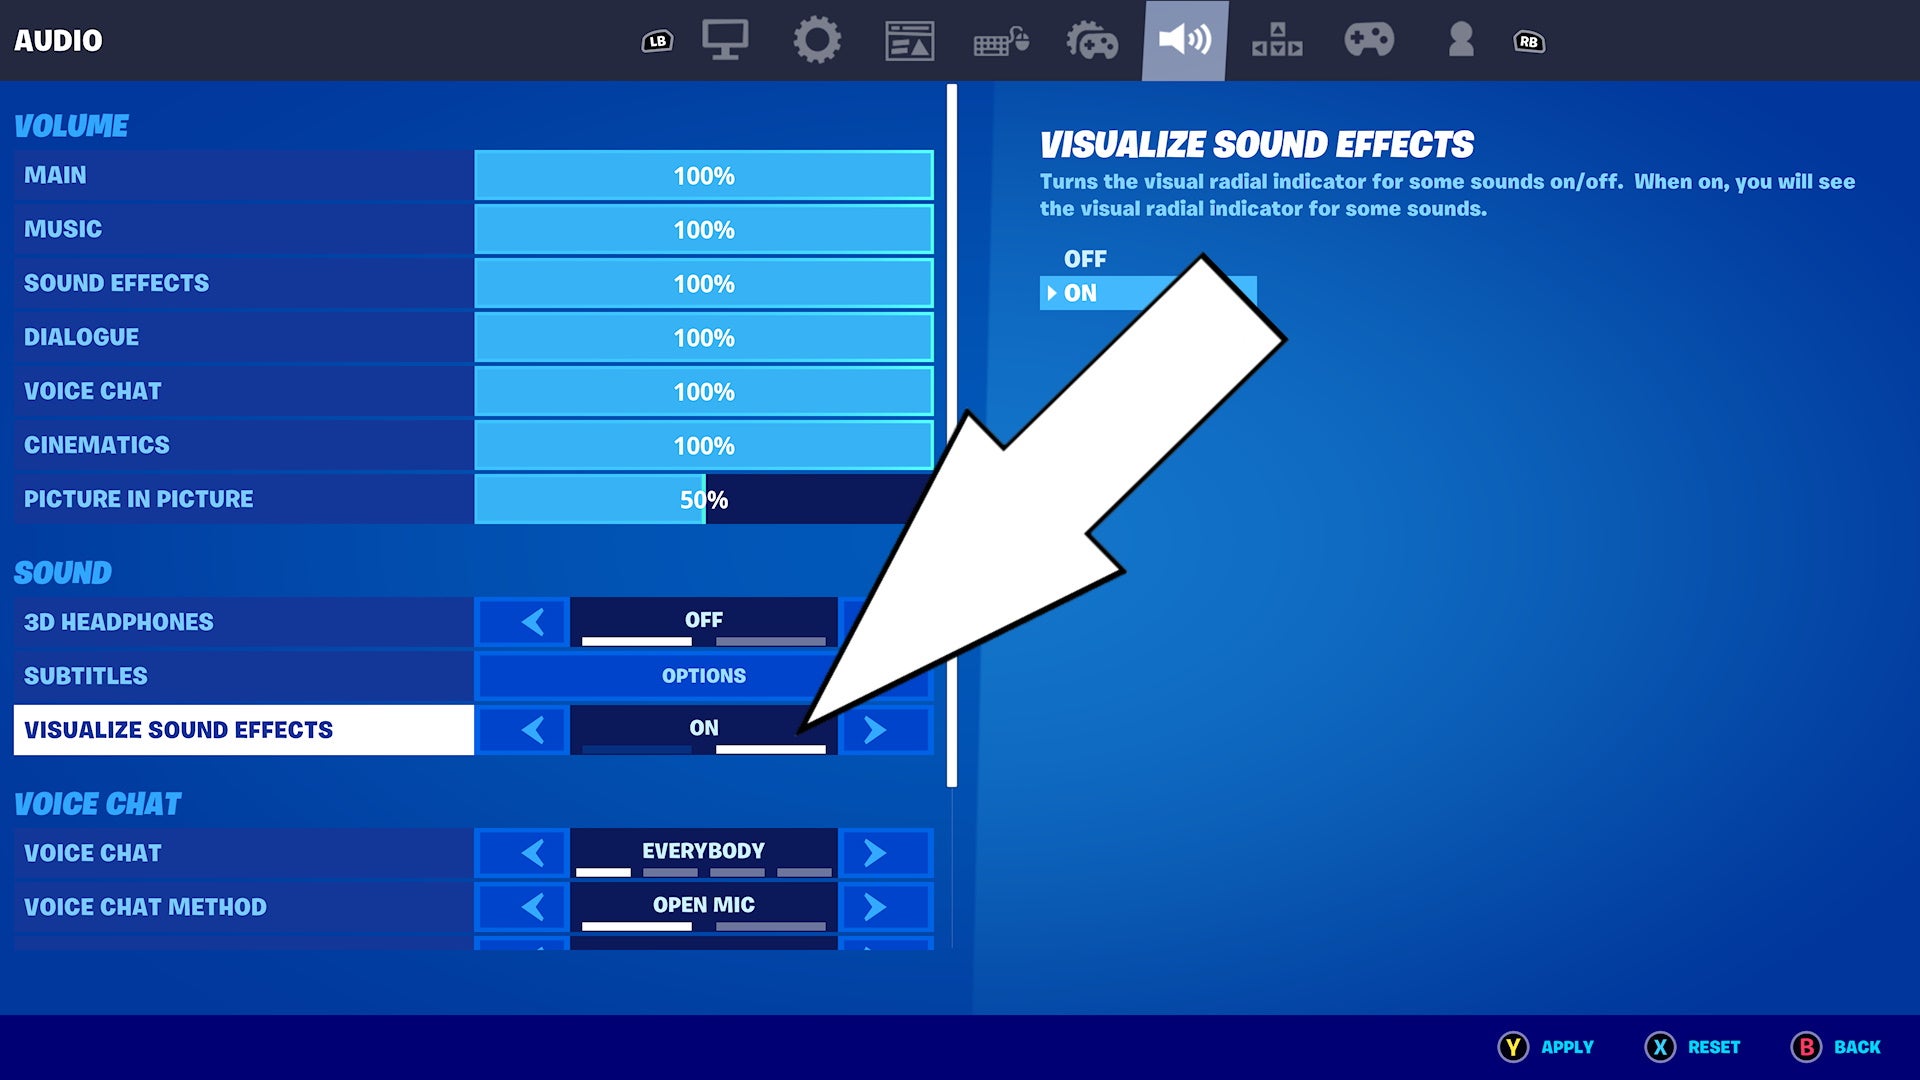 Fortnite Visualize Sound Effects option